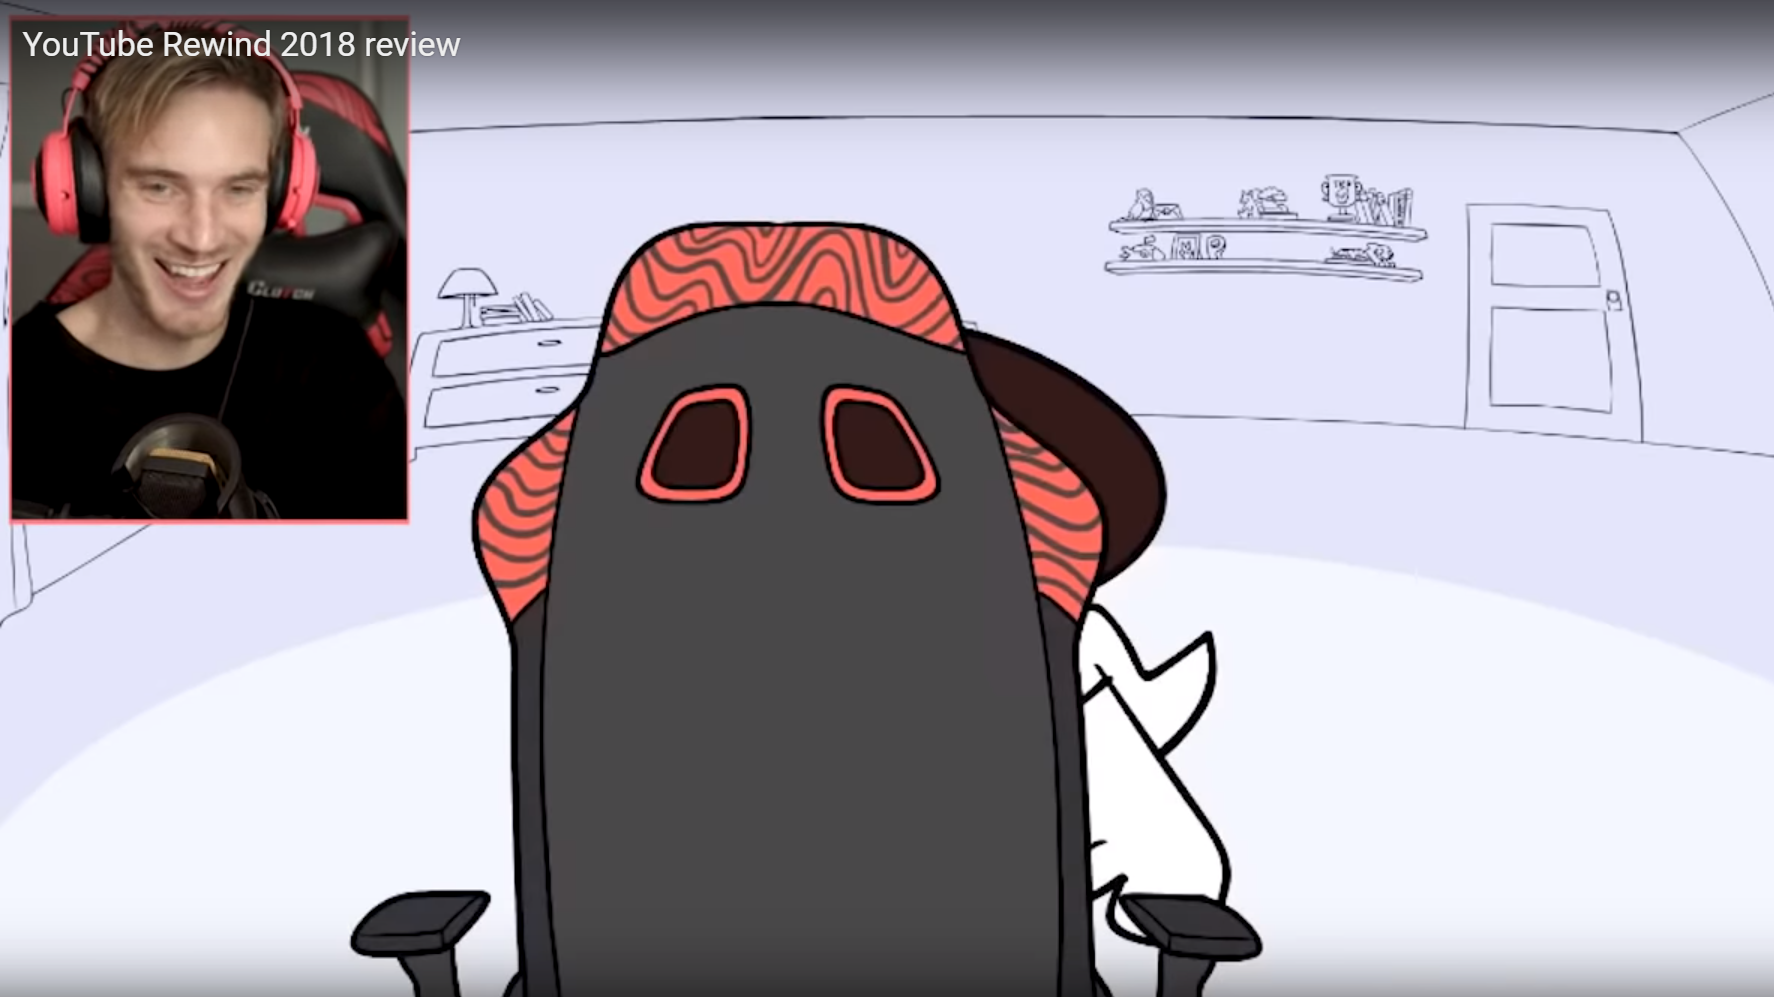 Must watch: PewDiePie reviewing YouTube Rewind 2018 (oh, there's his chair)